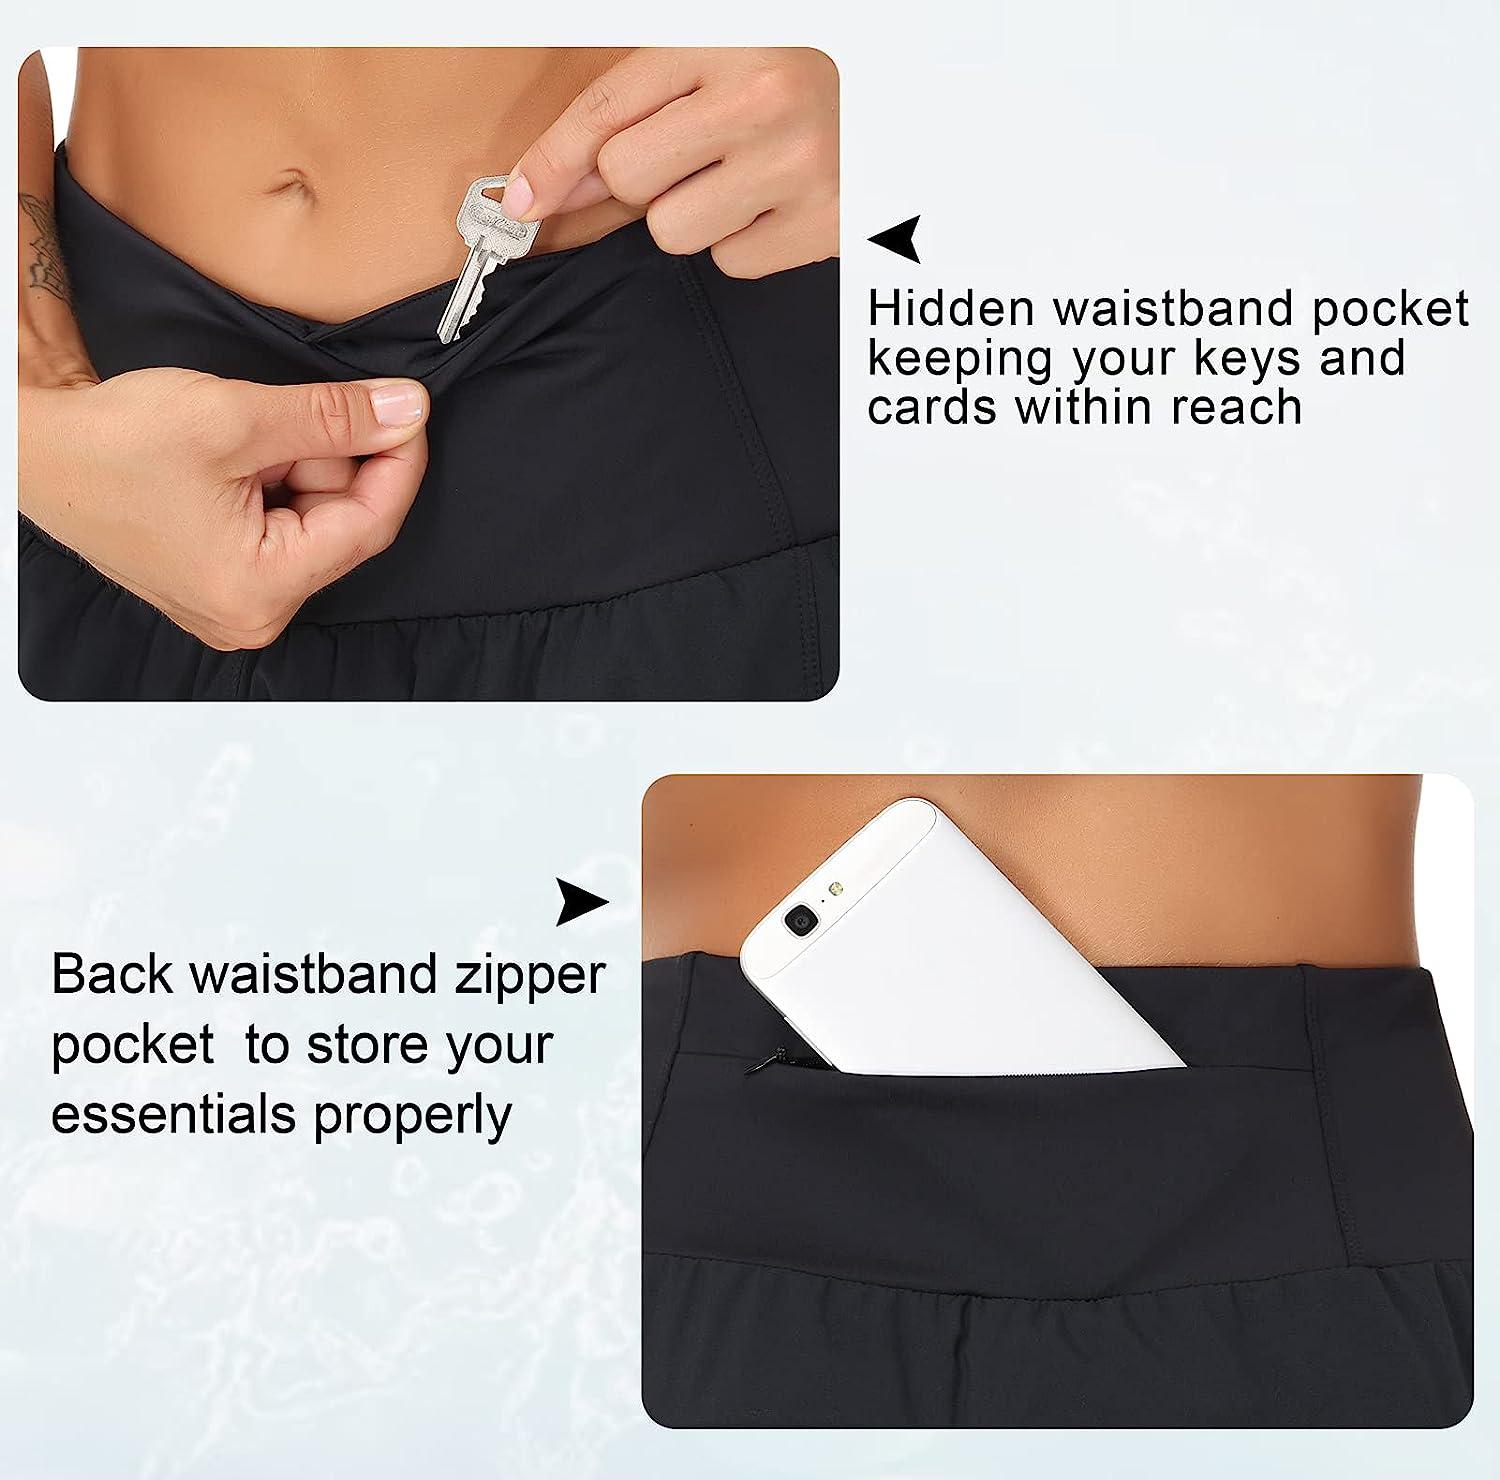  THE GYM PEOPLE Womens High Waisted Running Shorts